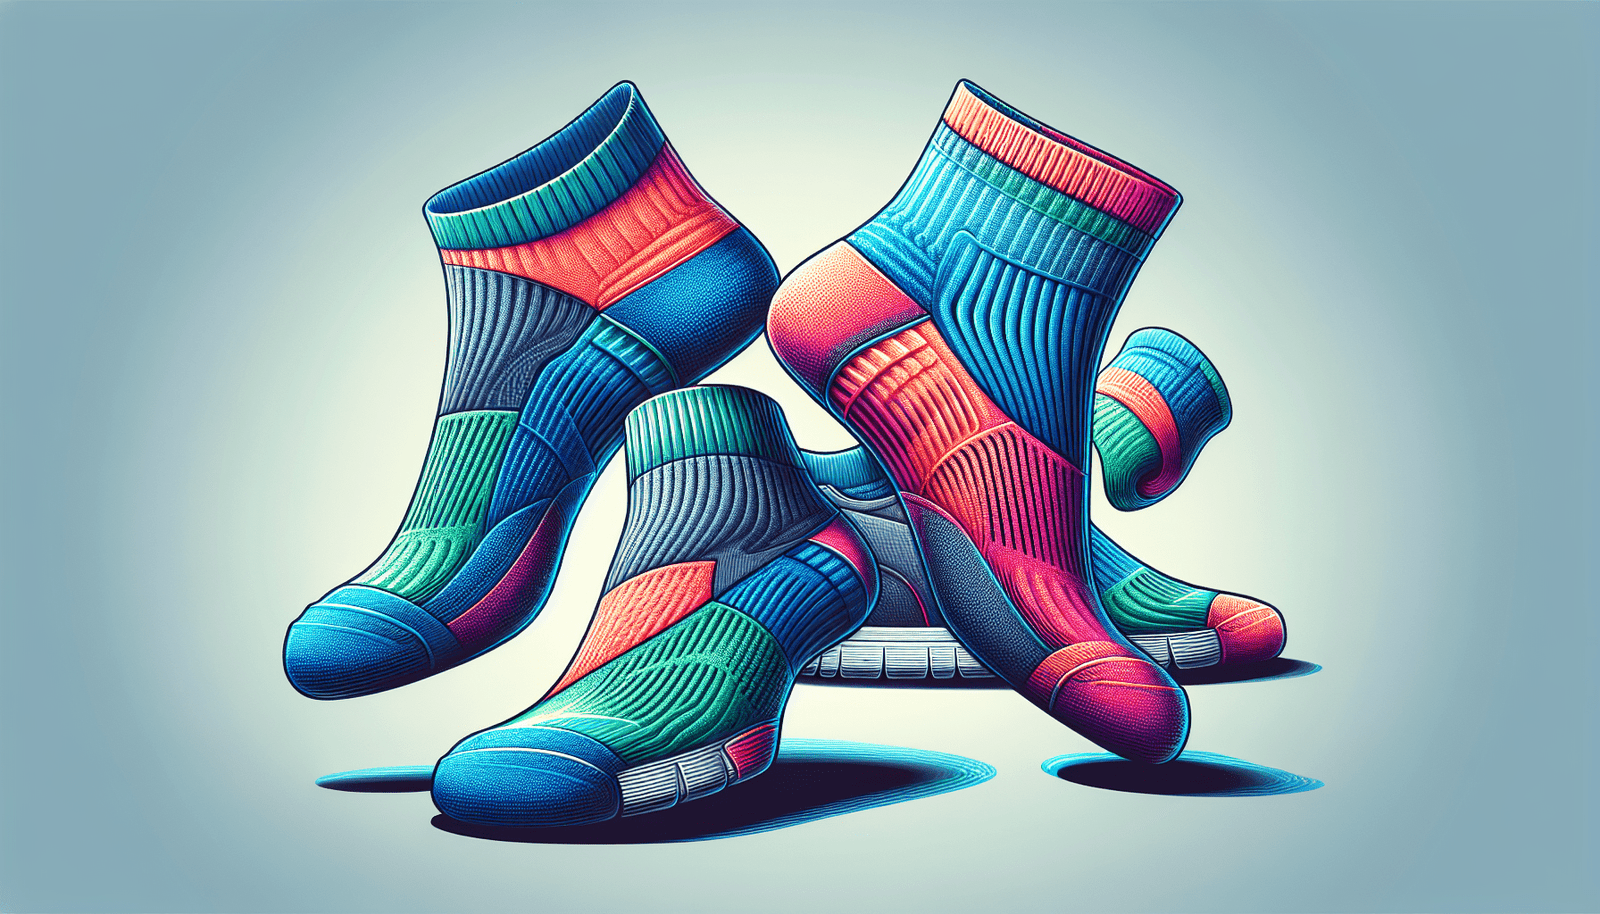 Sock Selection Guide: Finding the Right Pair for Different Shoe Types